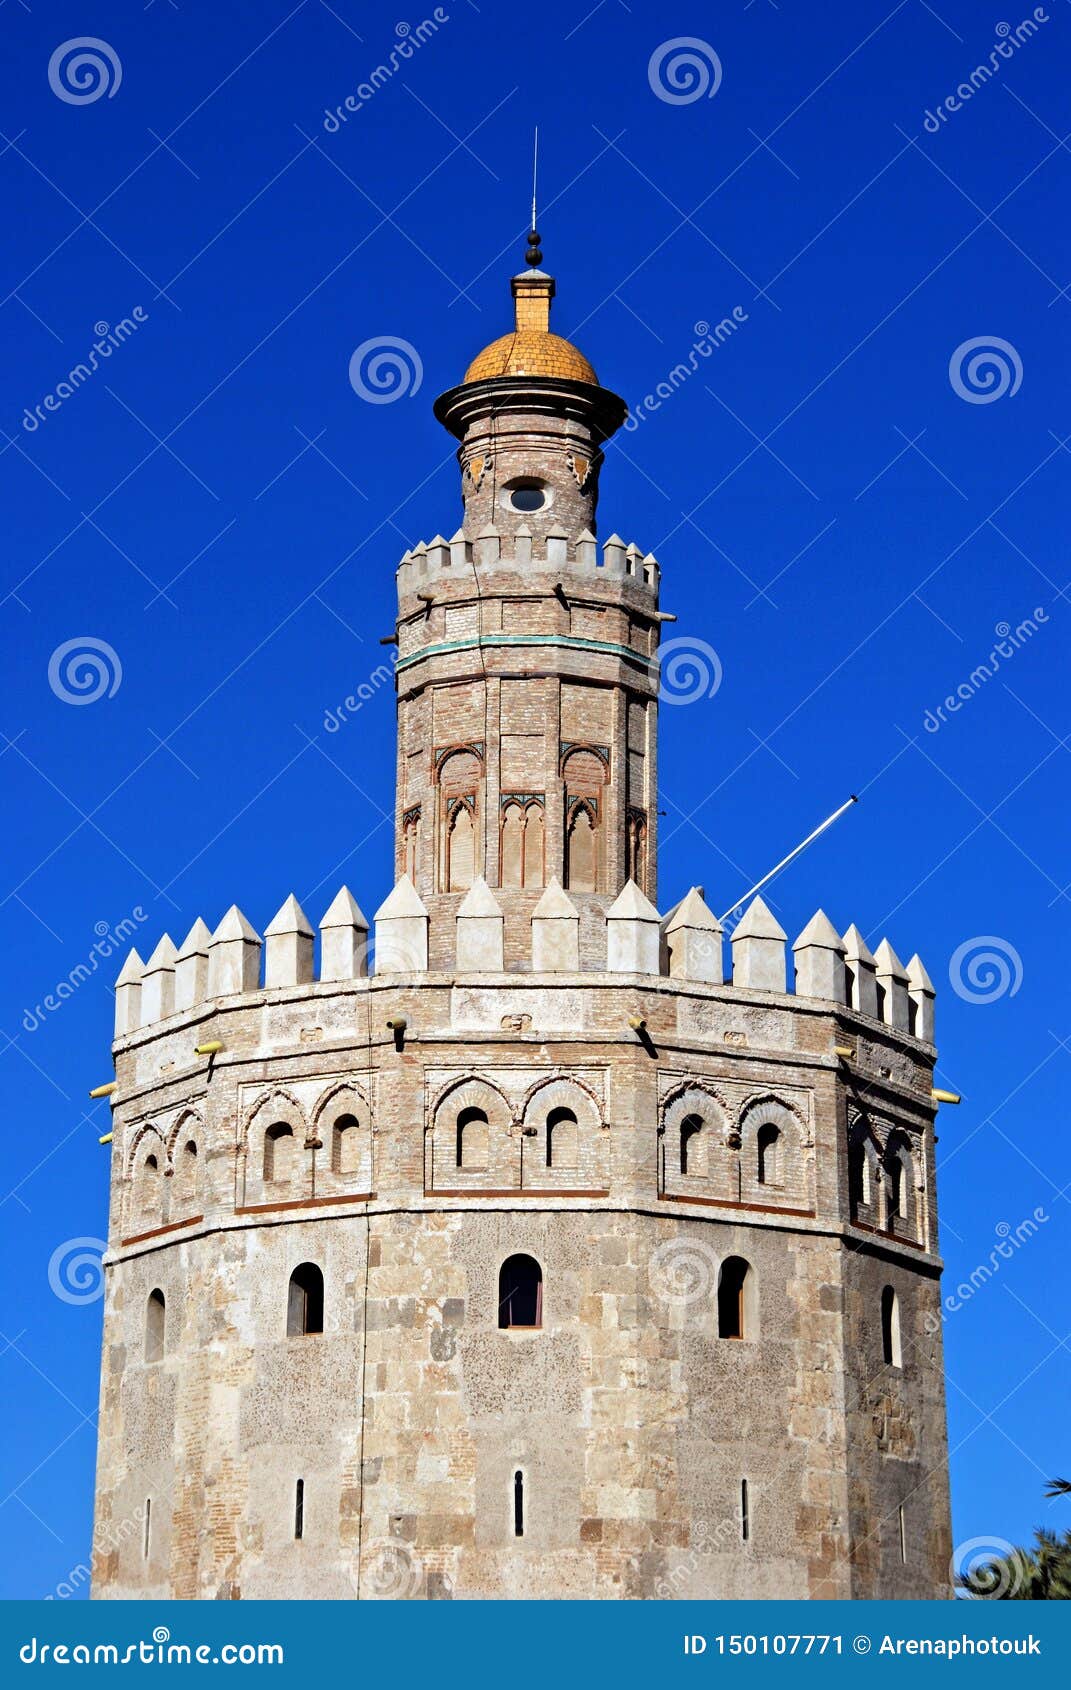 top of the torre del oro, seville, spain.